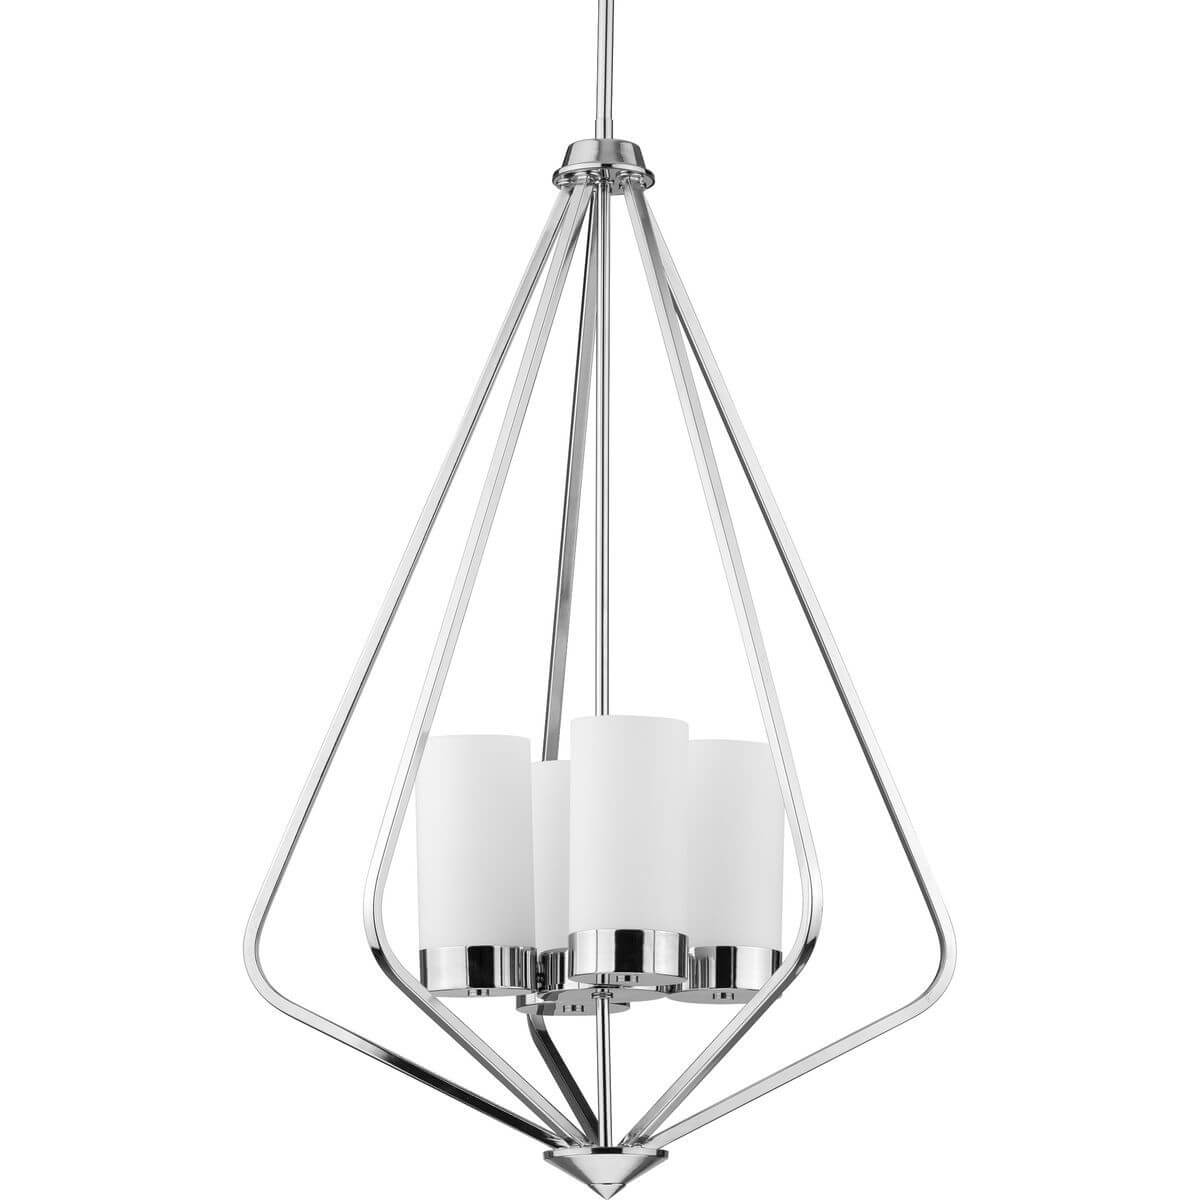 Progress Lighting Elevate 4 Light 20 inch Foyer Pendant in Polished Chrome with Etched Painted White Inside Glass P500305-015